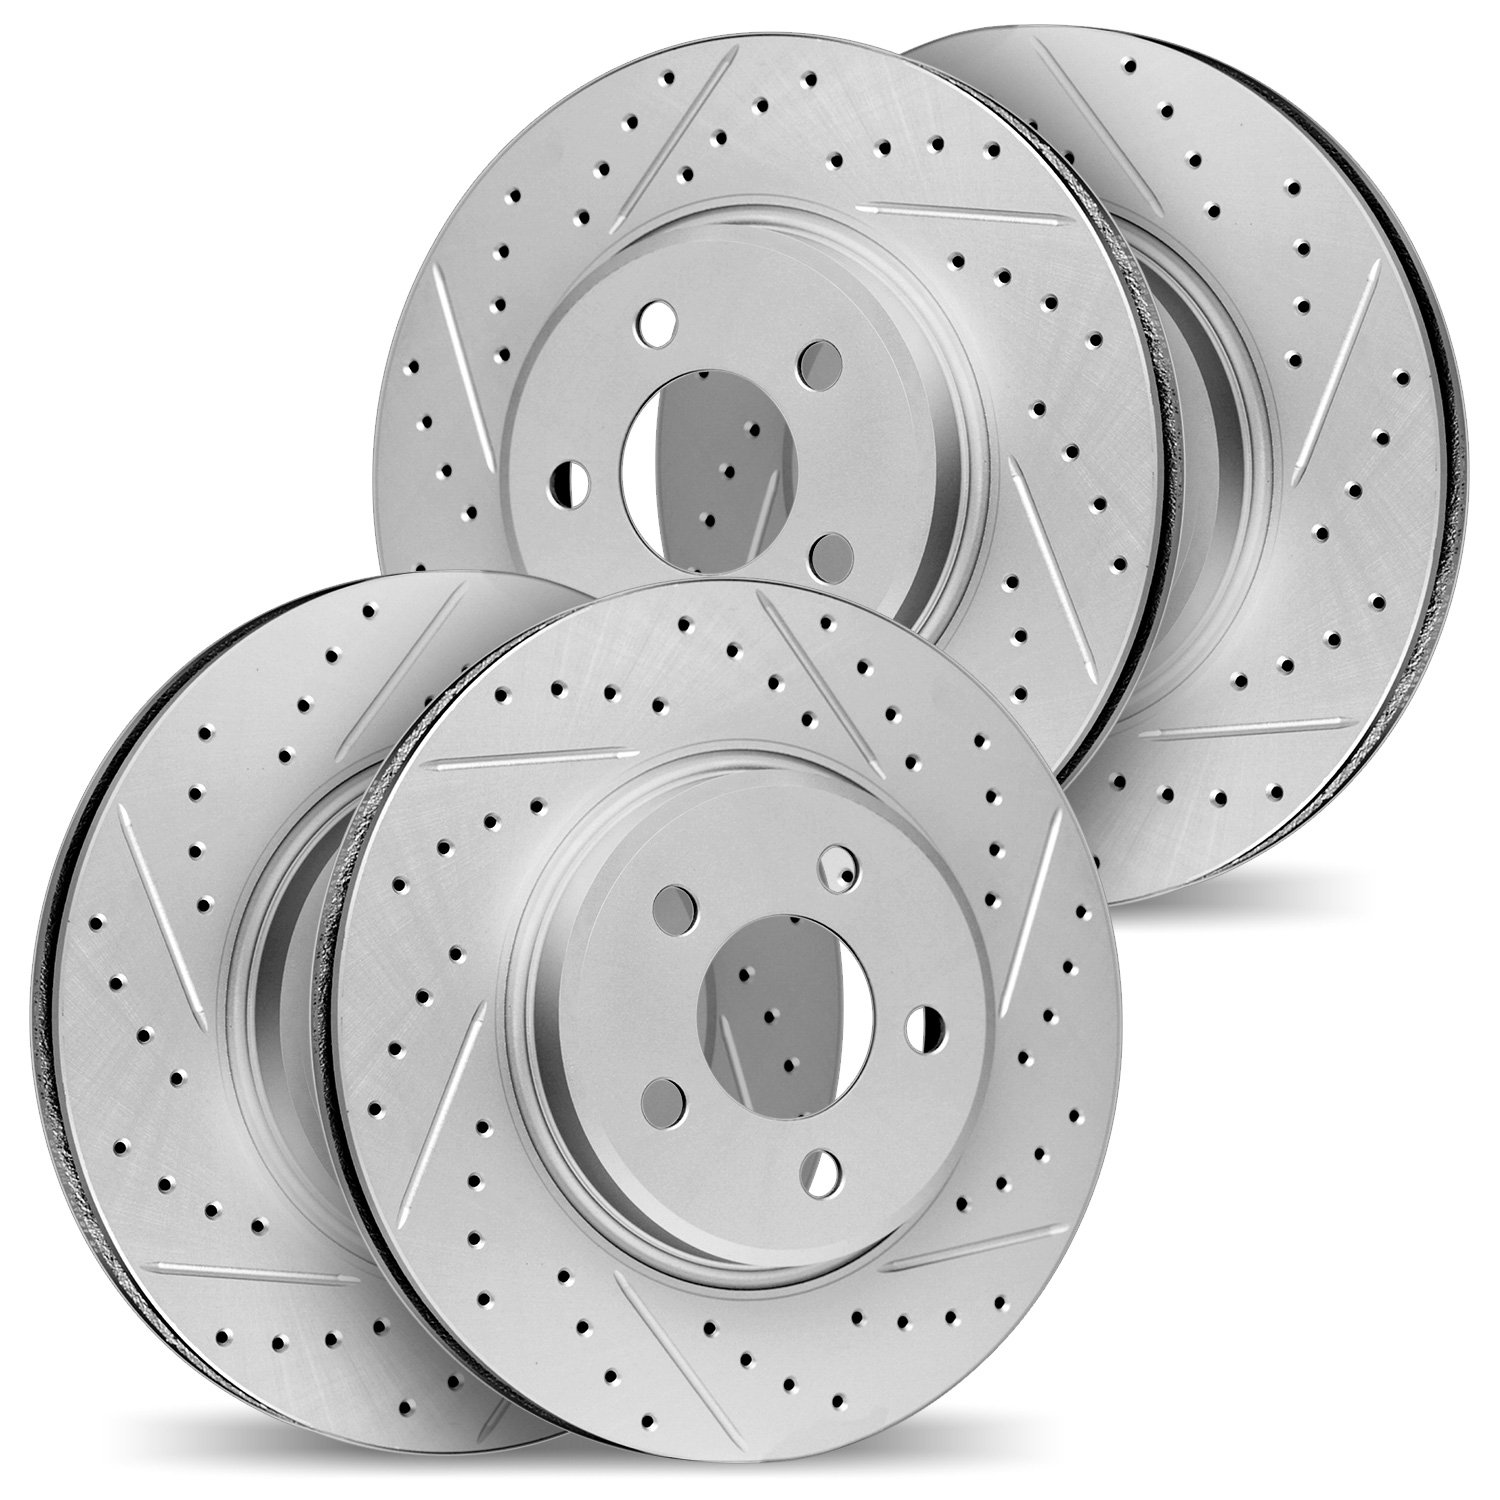 2004-75019 Geoperformance Drilled/Slotted Brake Rotors, 2007-2021 Lexus/Toyota/Scion, Position: Front and Rear